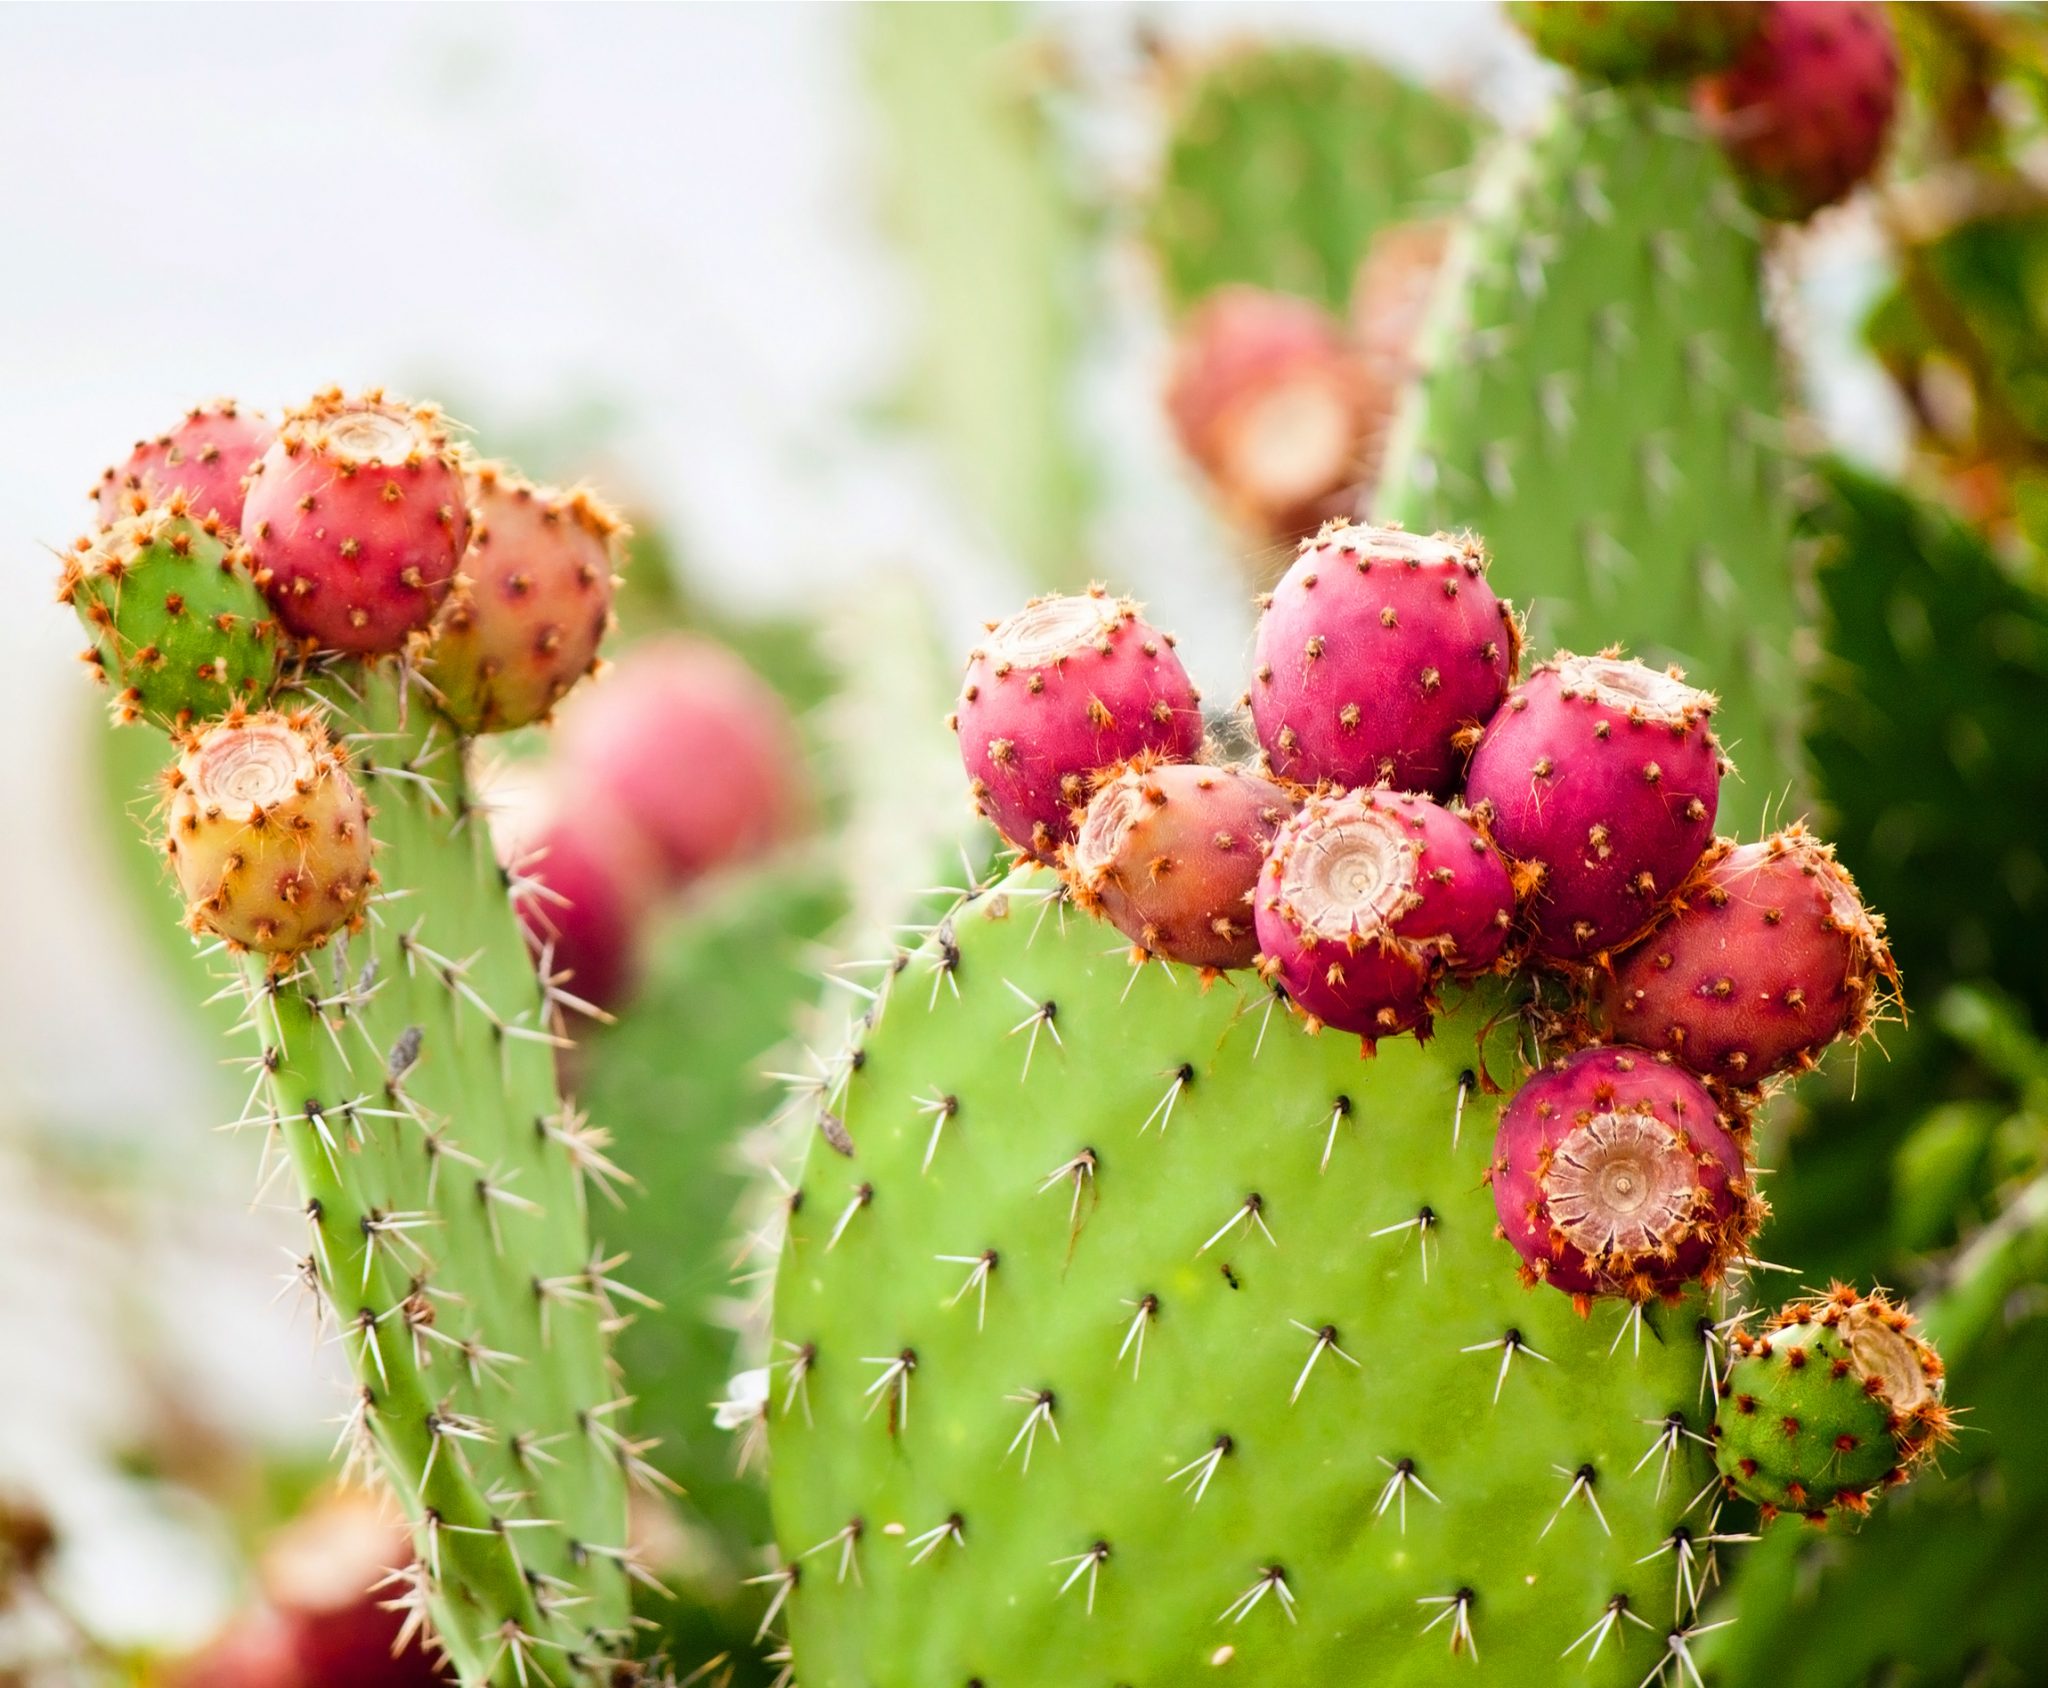 How To Plant And Grow Prickly Pear Cactus Install It Direct,Layered Baked Ziti With Ricotta